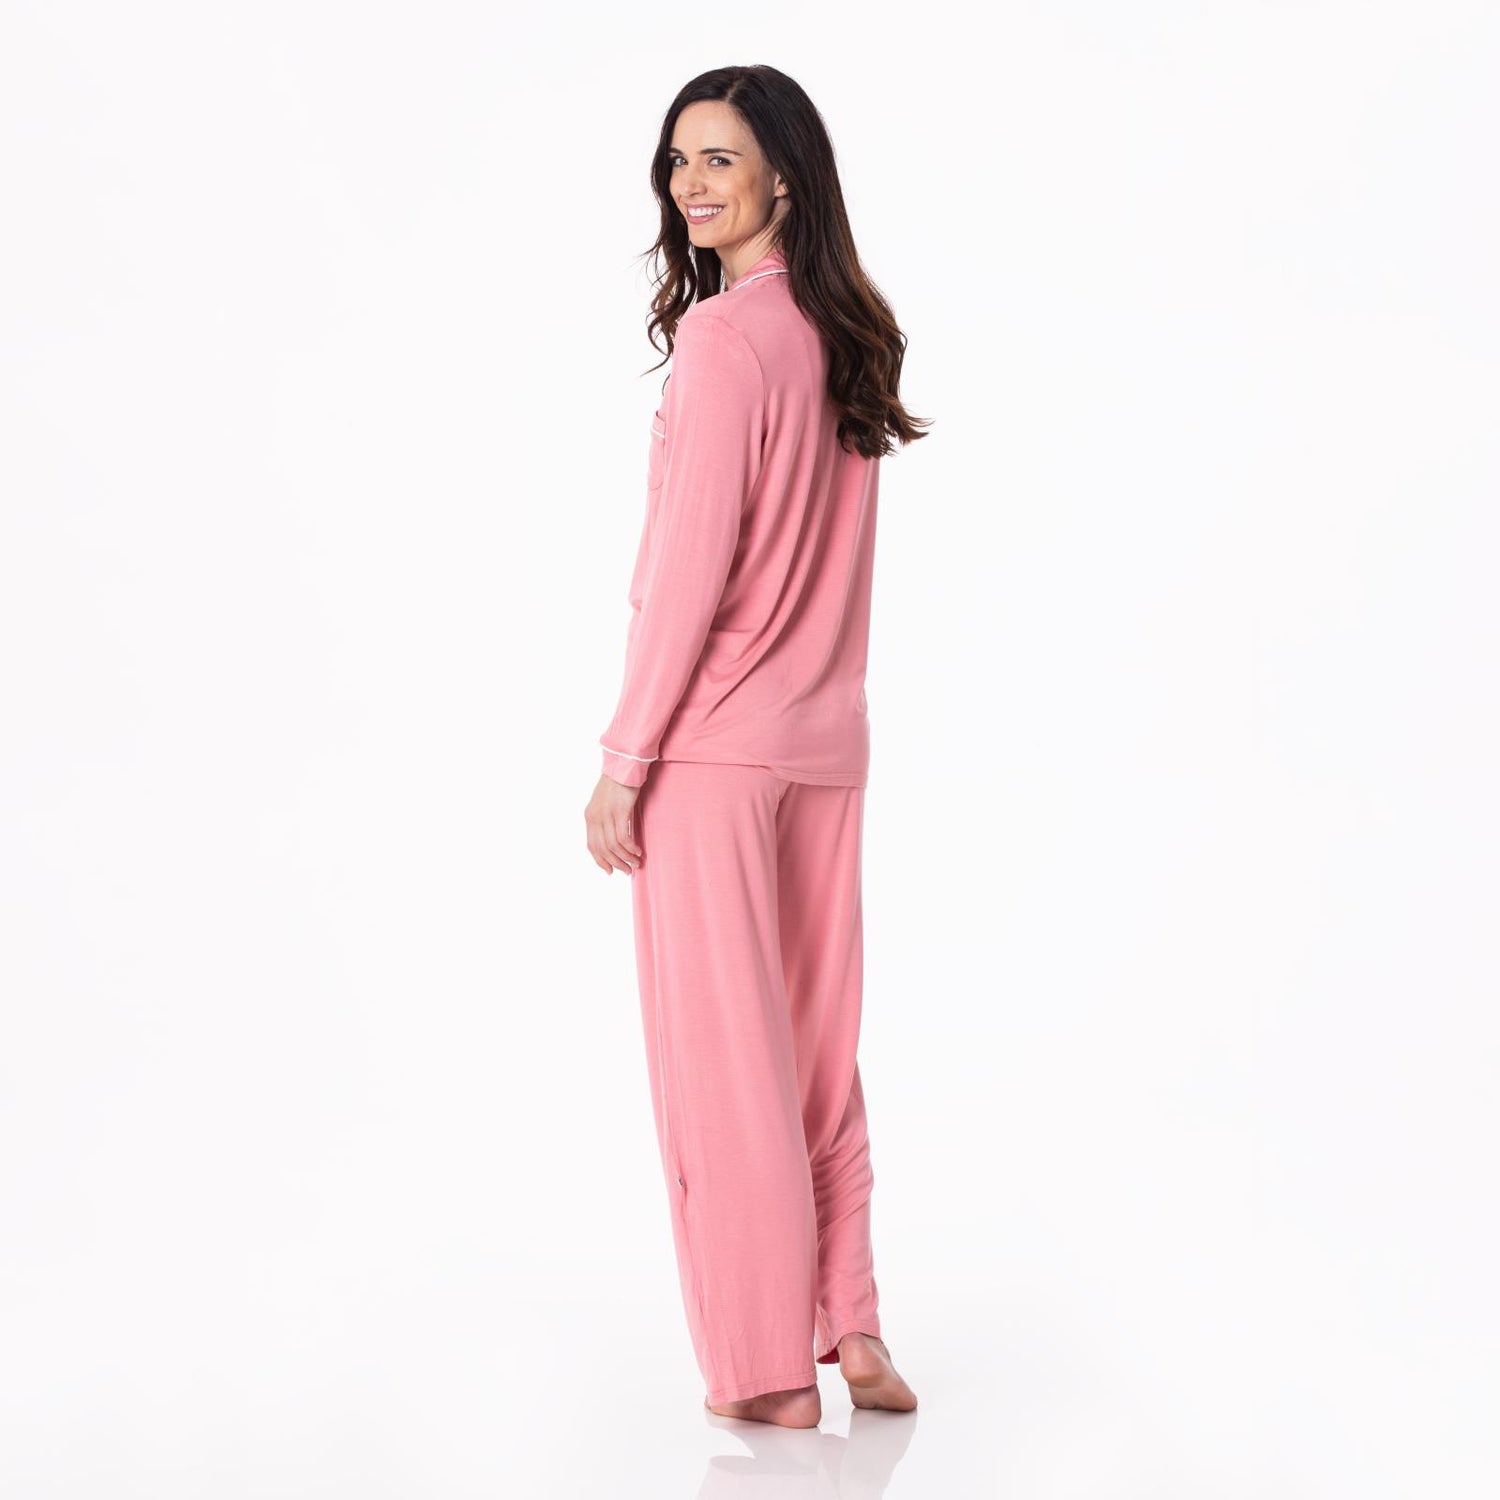 Women's Long Sleeved Collared Pajama Set in Desert Rose with Natural